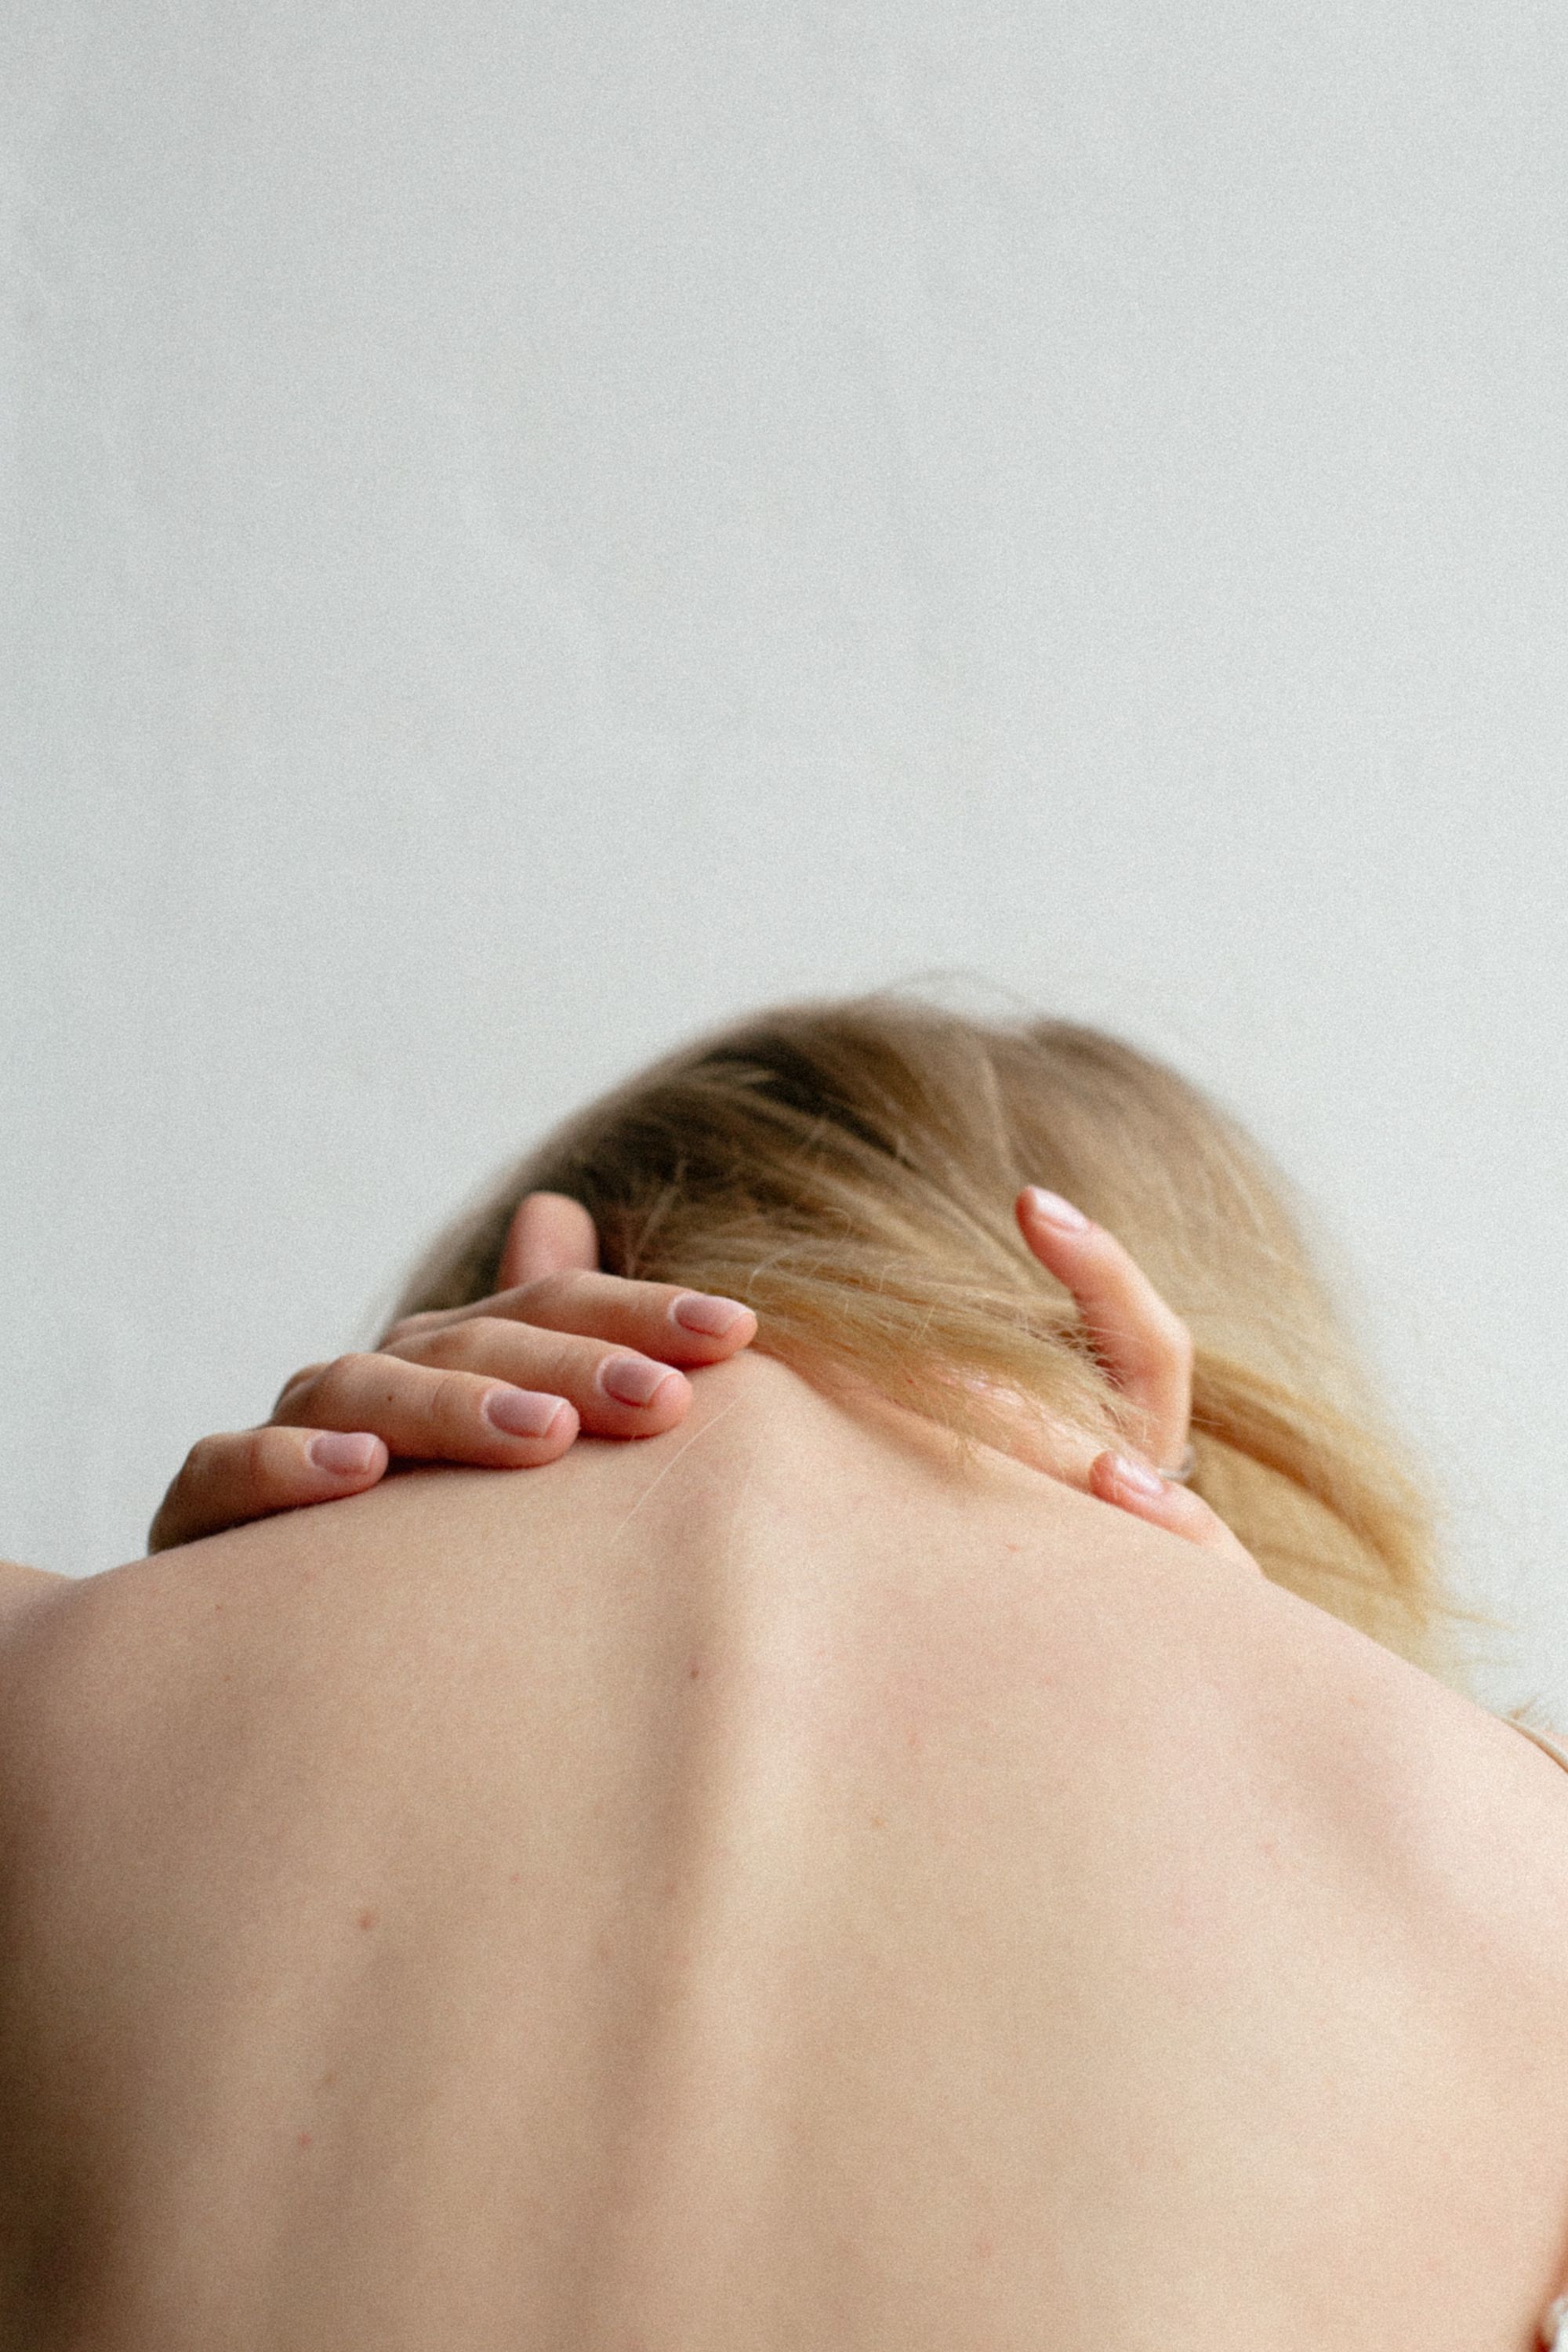 Causes and Remedies For Upper Back Pain